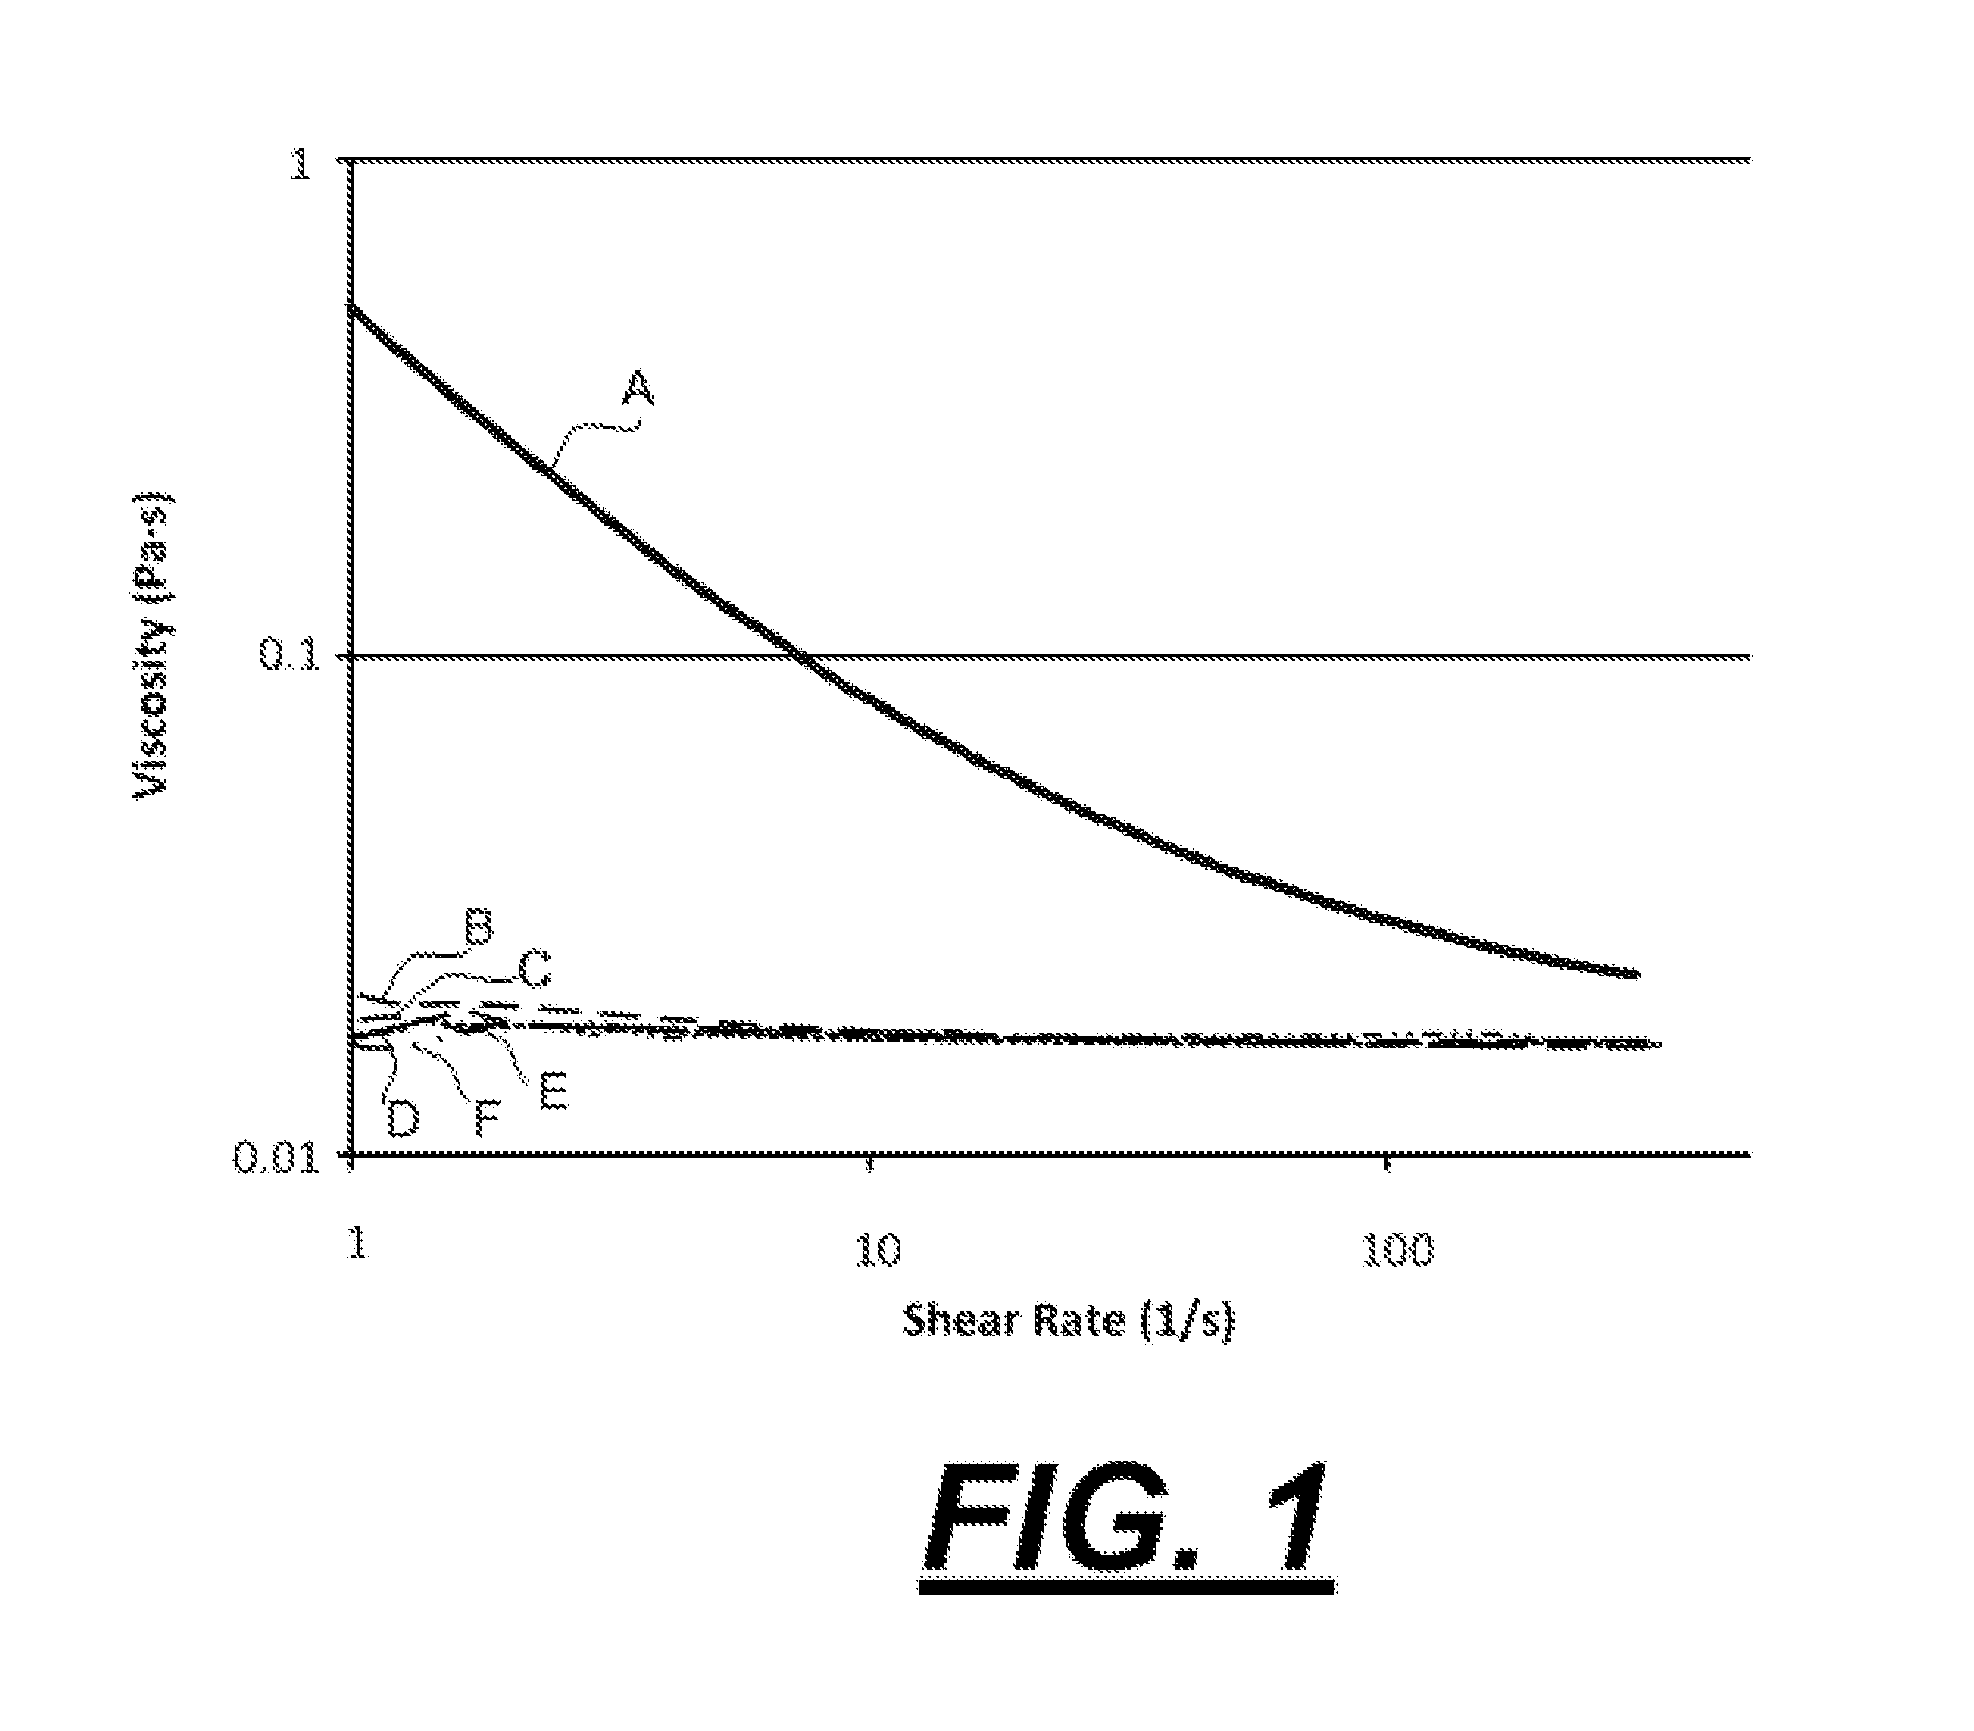 Lubricant compositions containing a functionalized dispersant